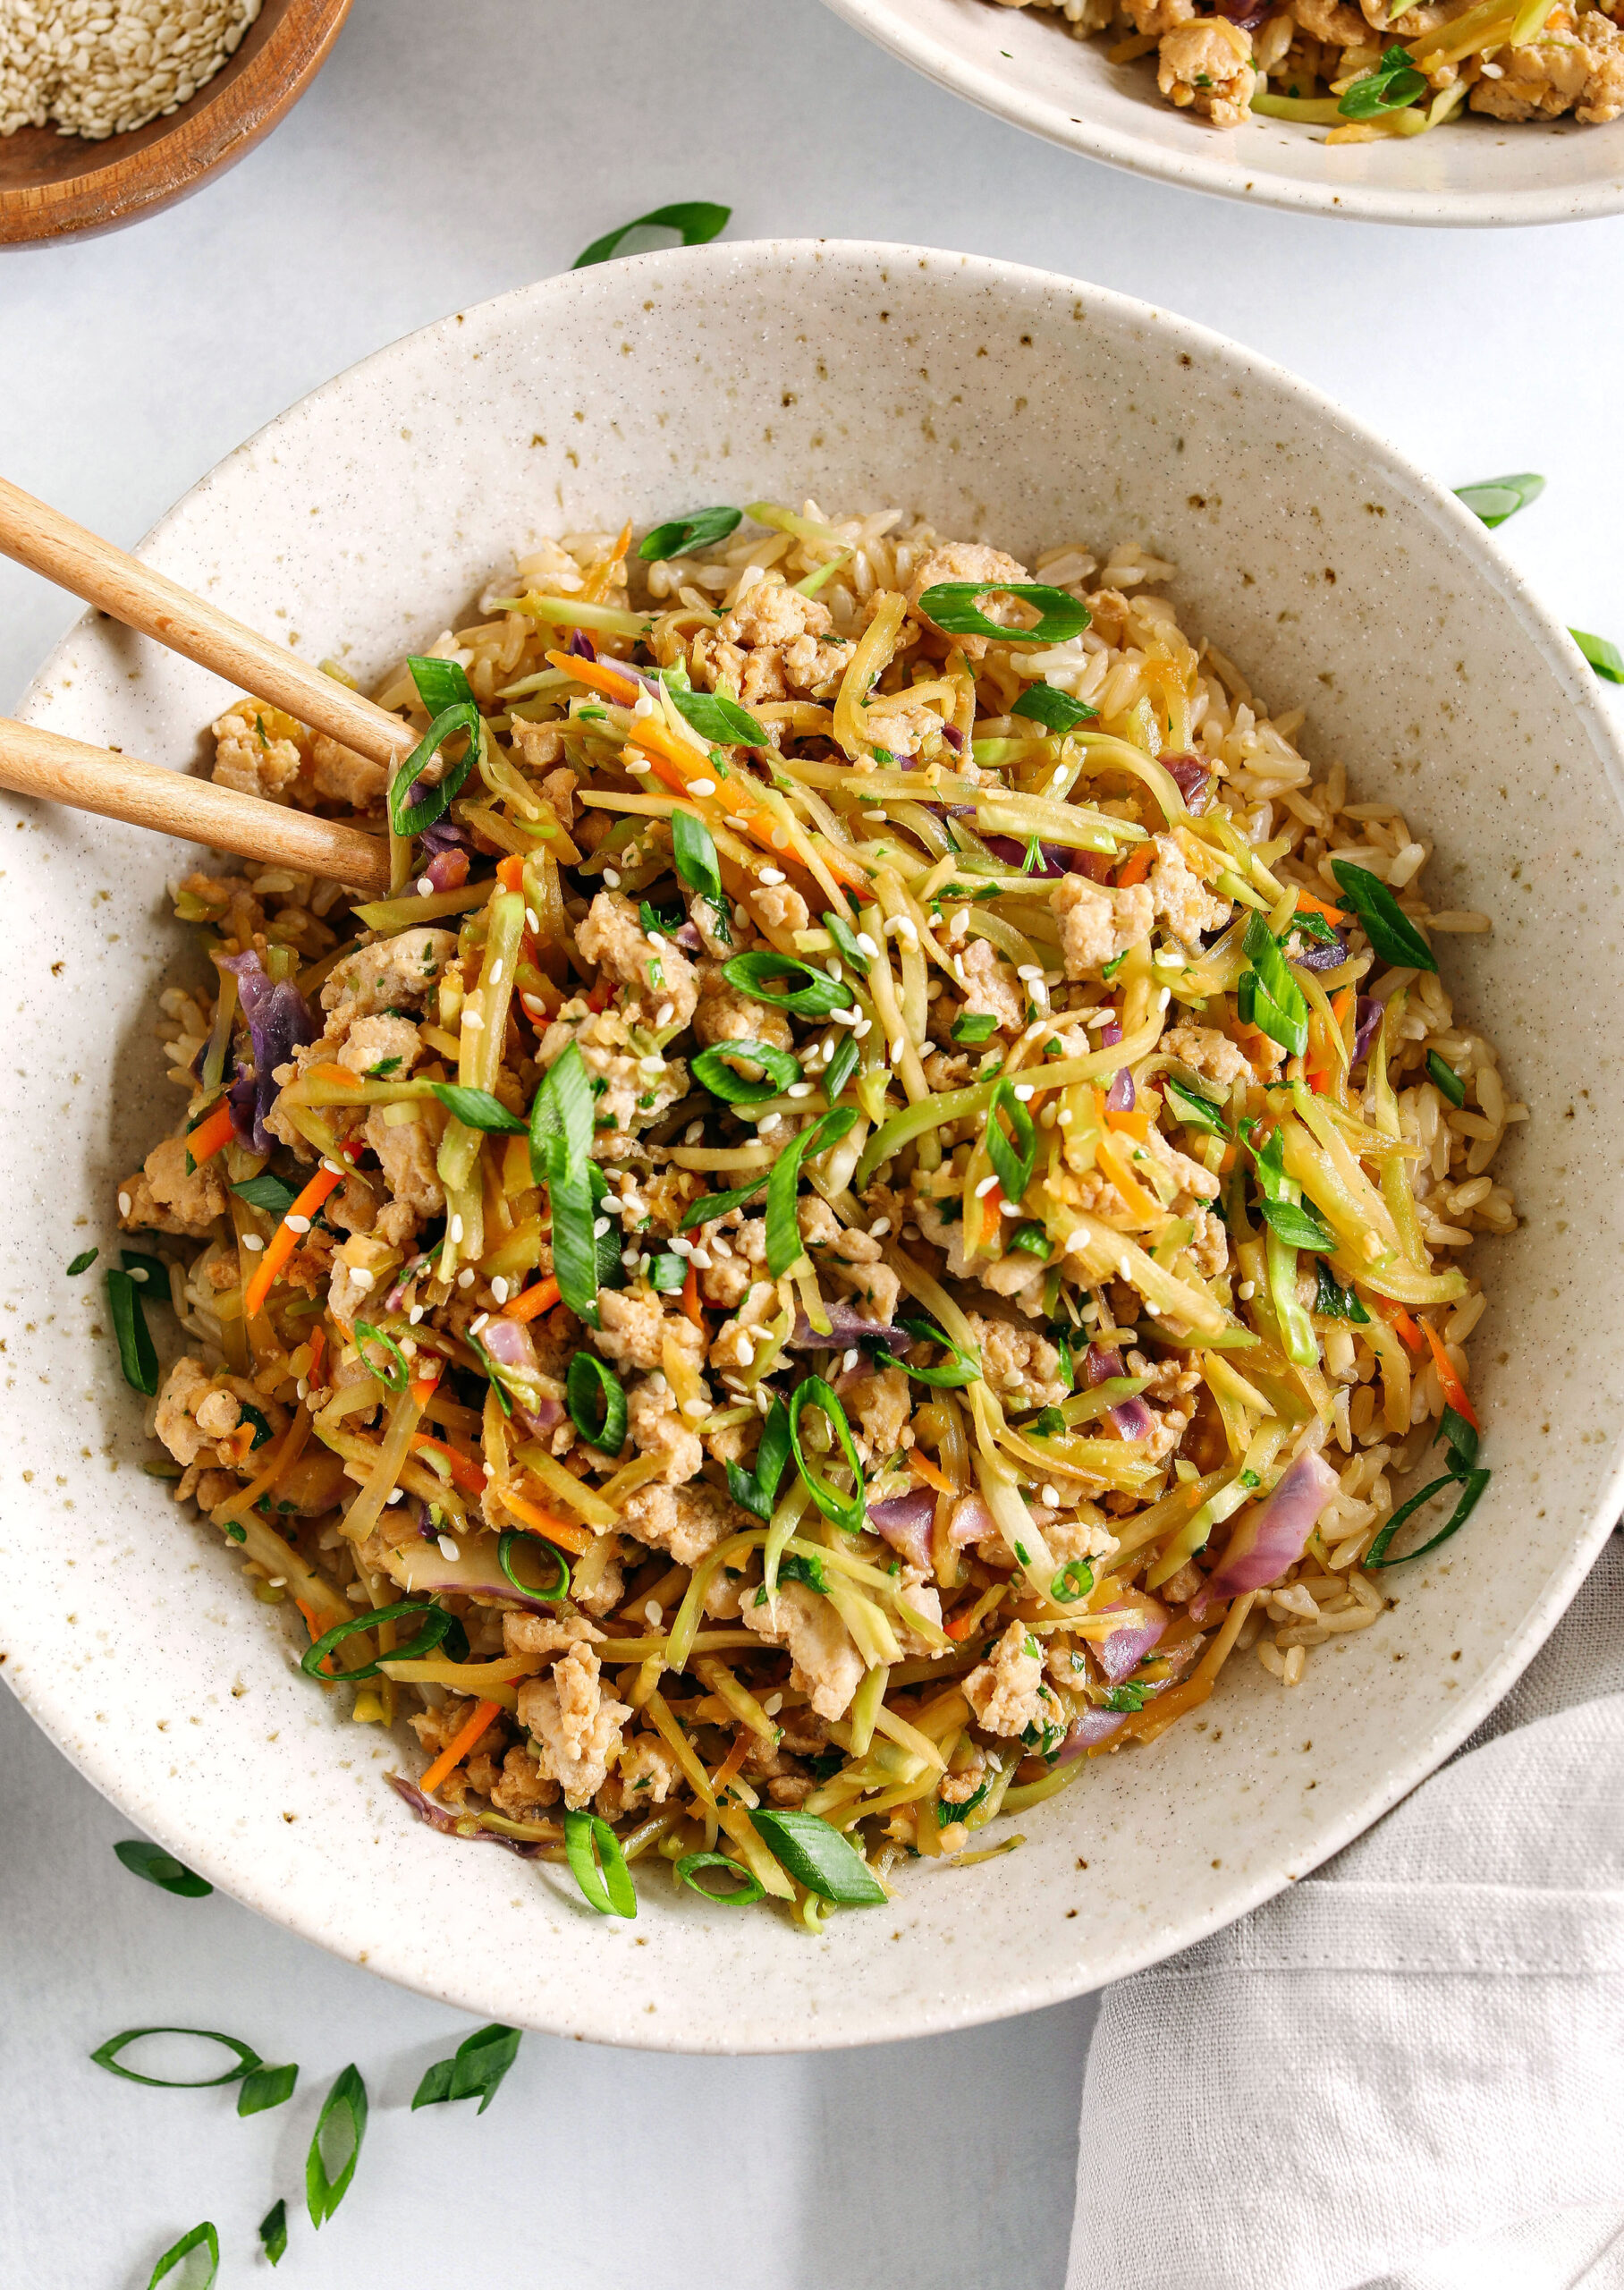 Easy and flavorful Chicken Egg Roll in a Bowl that comes together in under 20 minutes packed with so much flavor!  Perfect healthy weeknight dinner served over rice and garnished with green onions and sesame seeds.